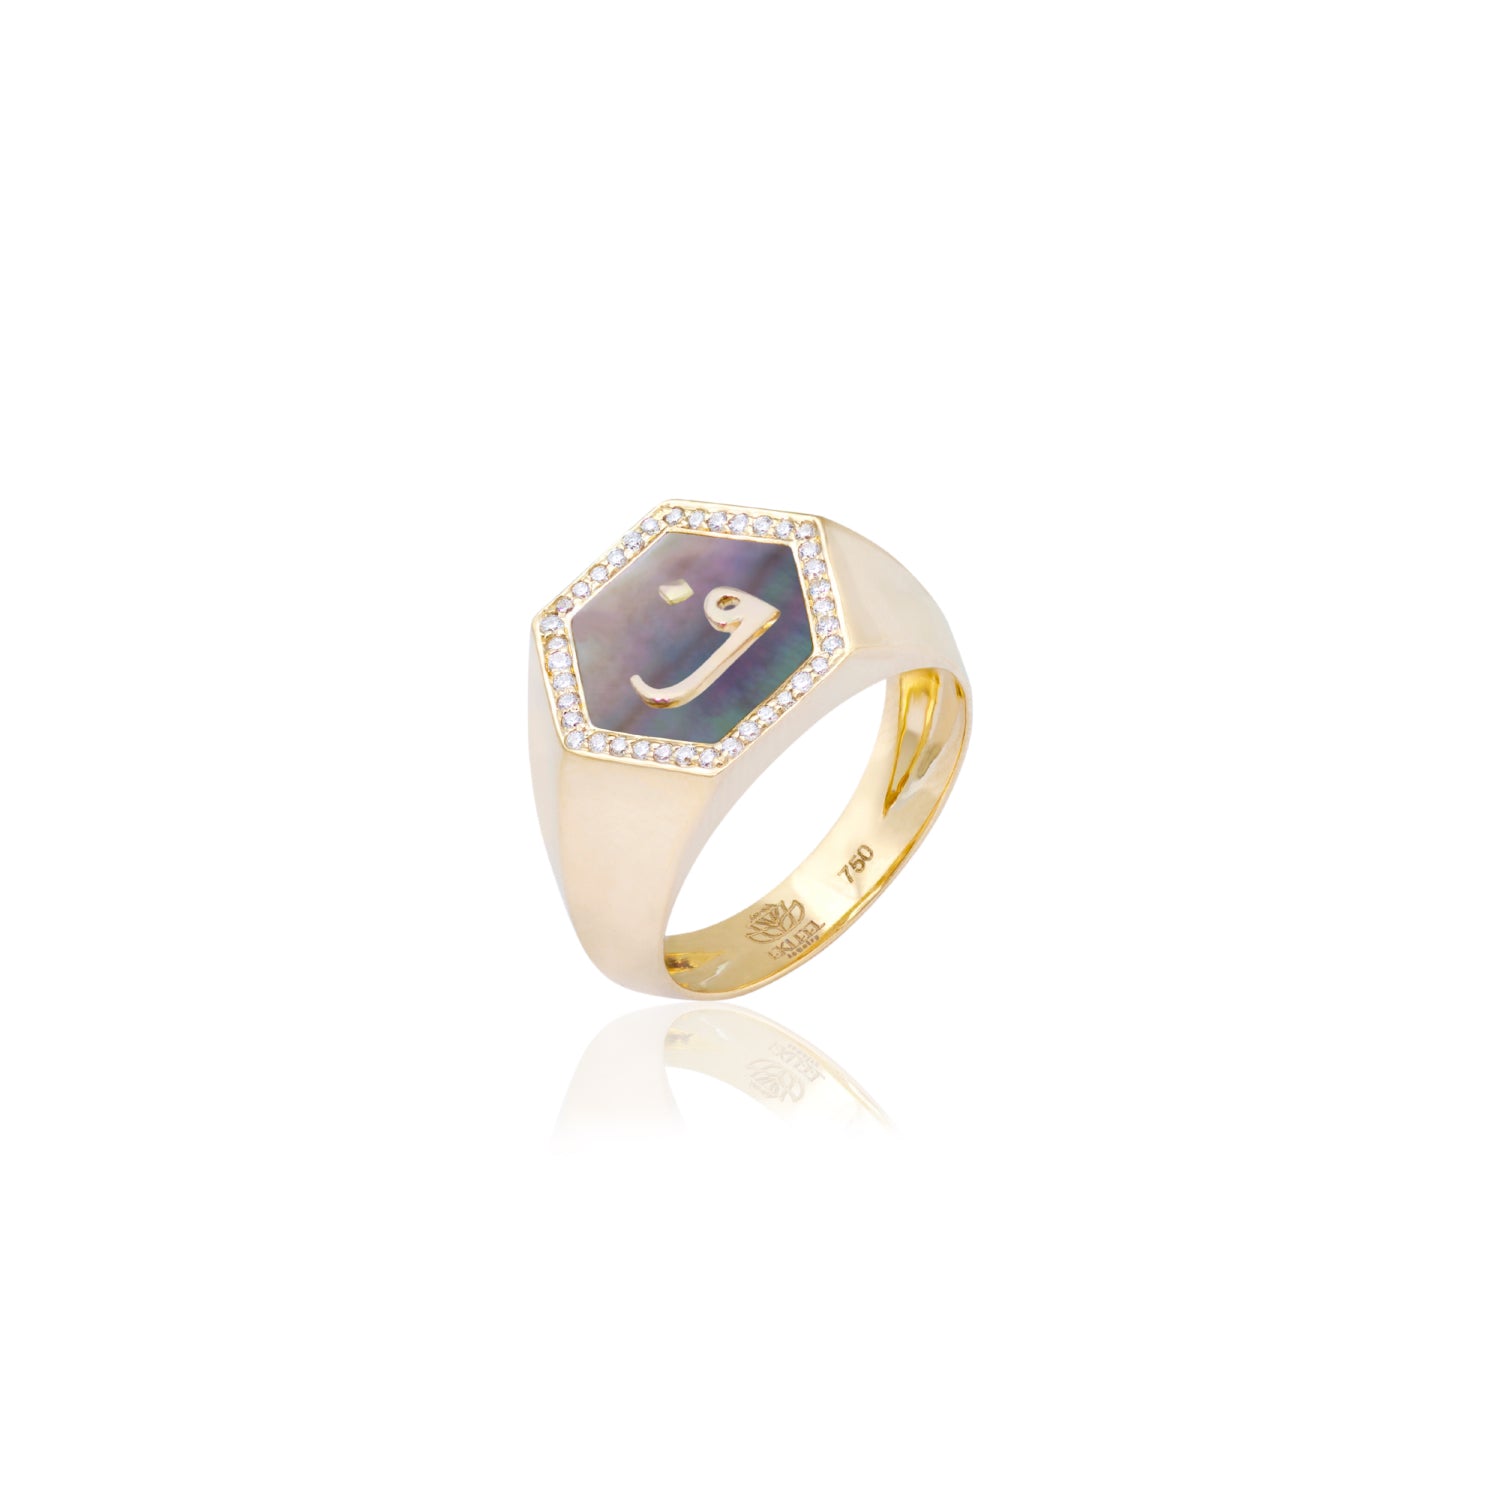 Qamoos 2.0 Letter ف Black Mother of Pearl and Diamond Signet Ring in Yellow Gold